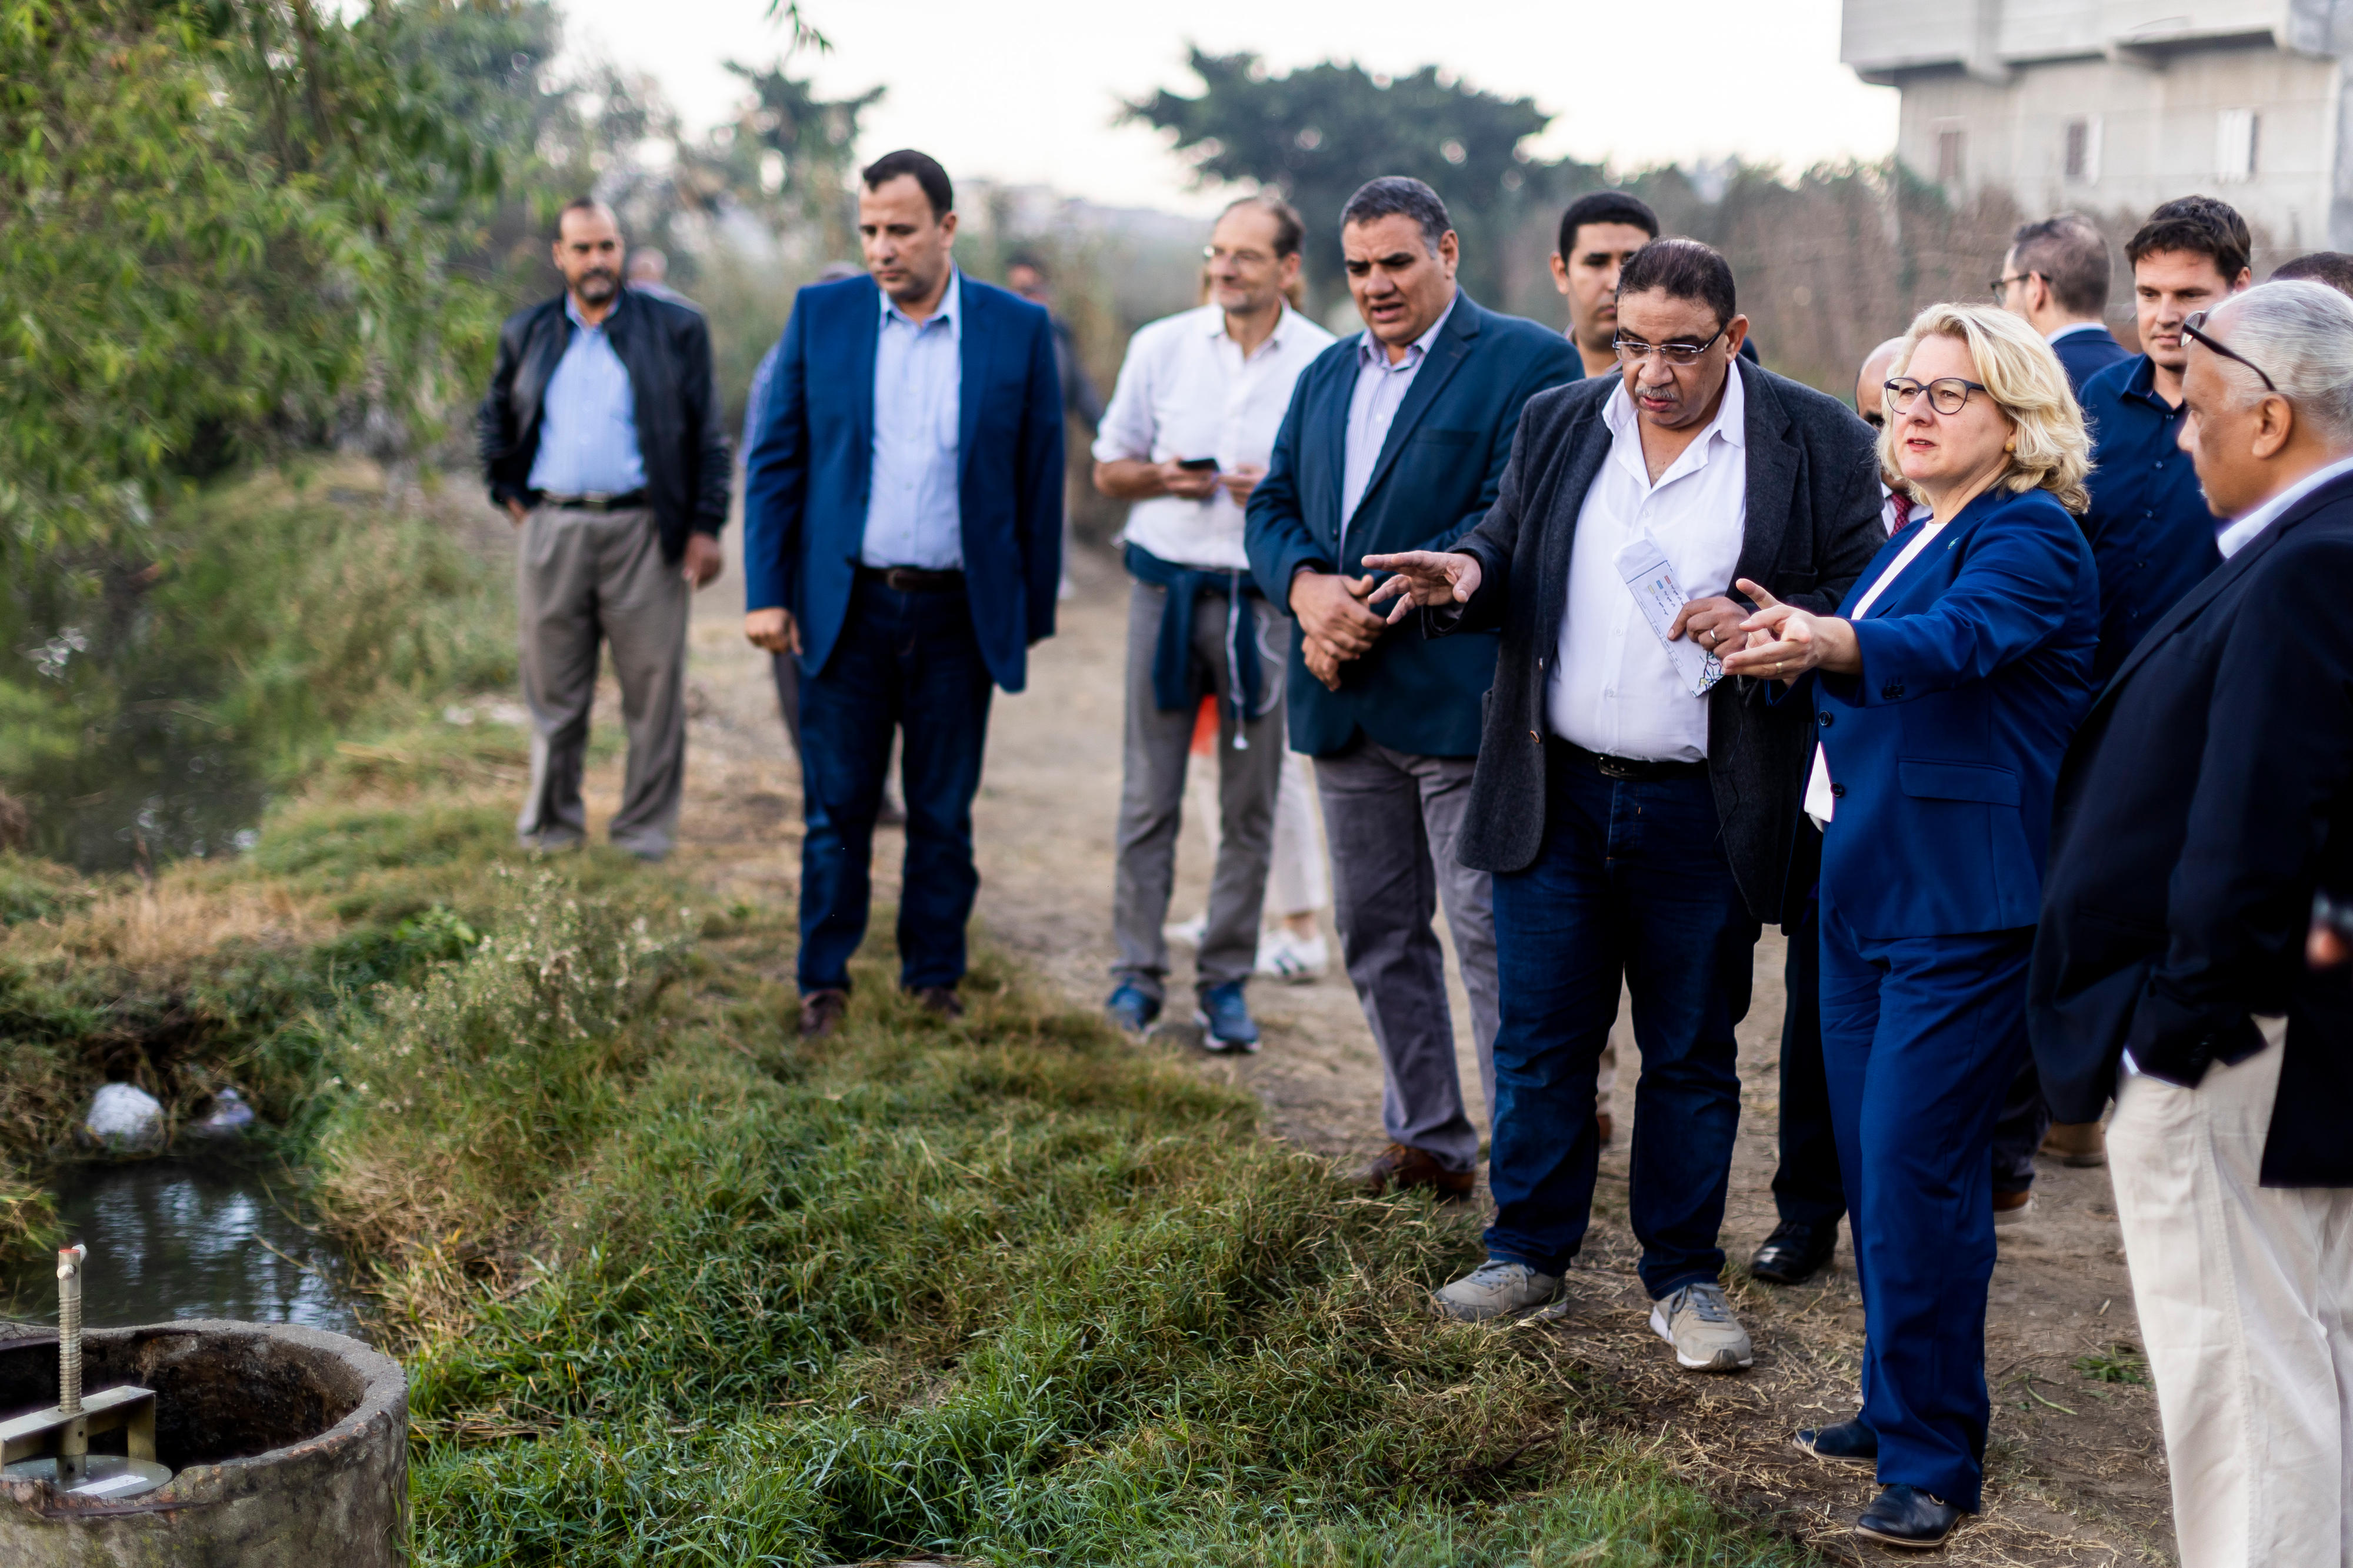 German Development Minister Svenja Schulze is visiting a BMZ-financed project in Egypt that contributes to making irrigation of fields more efficient and reducing water losses.